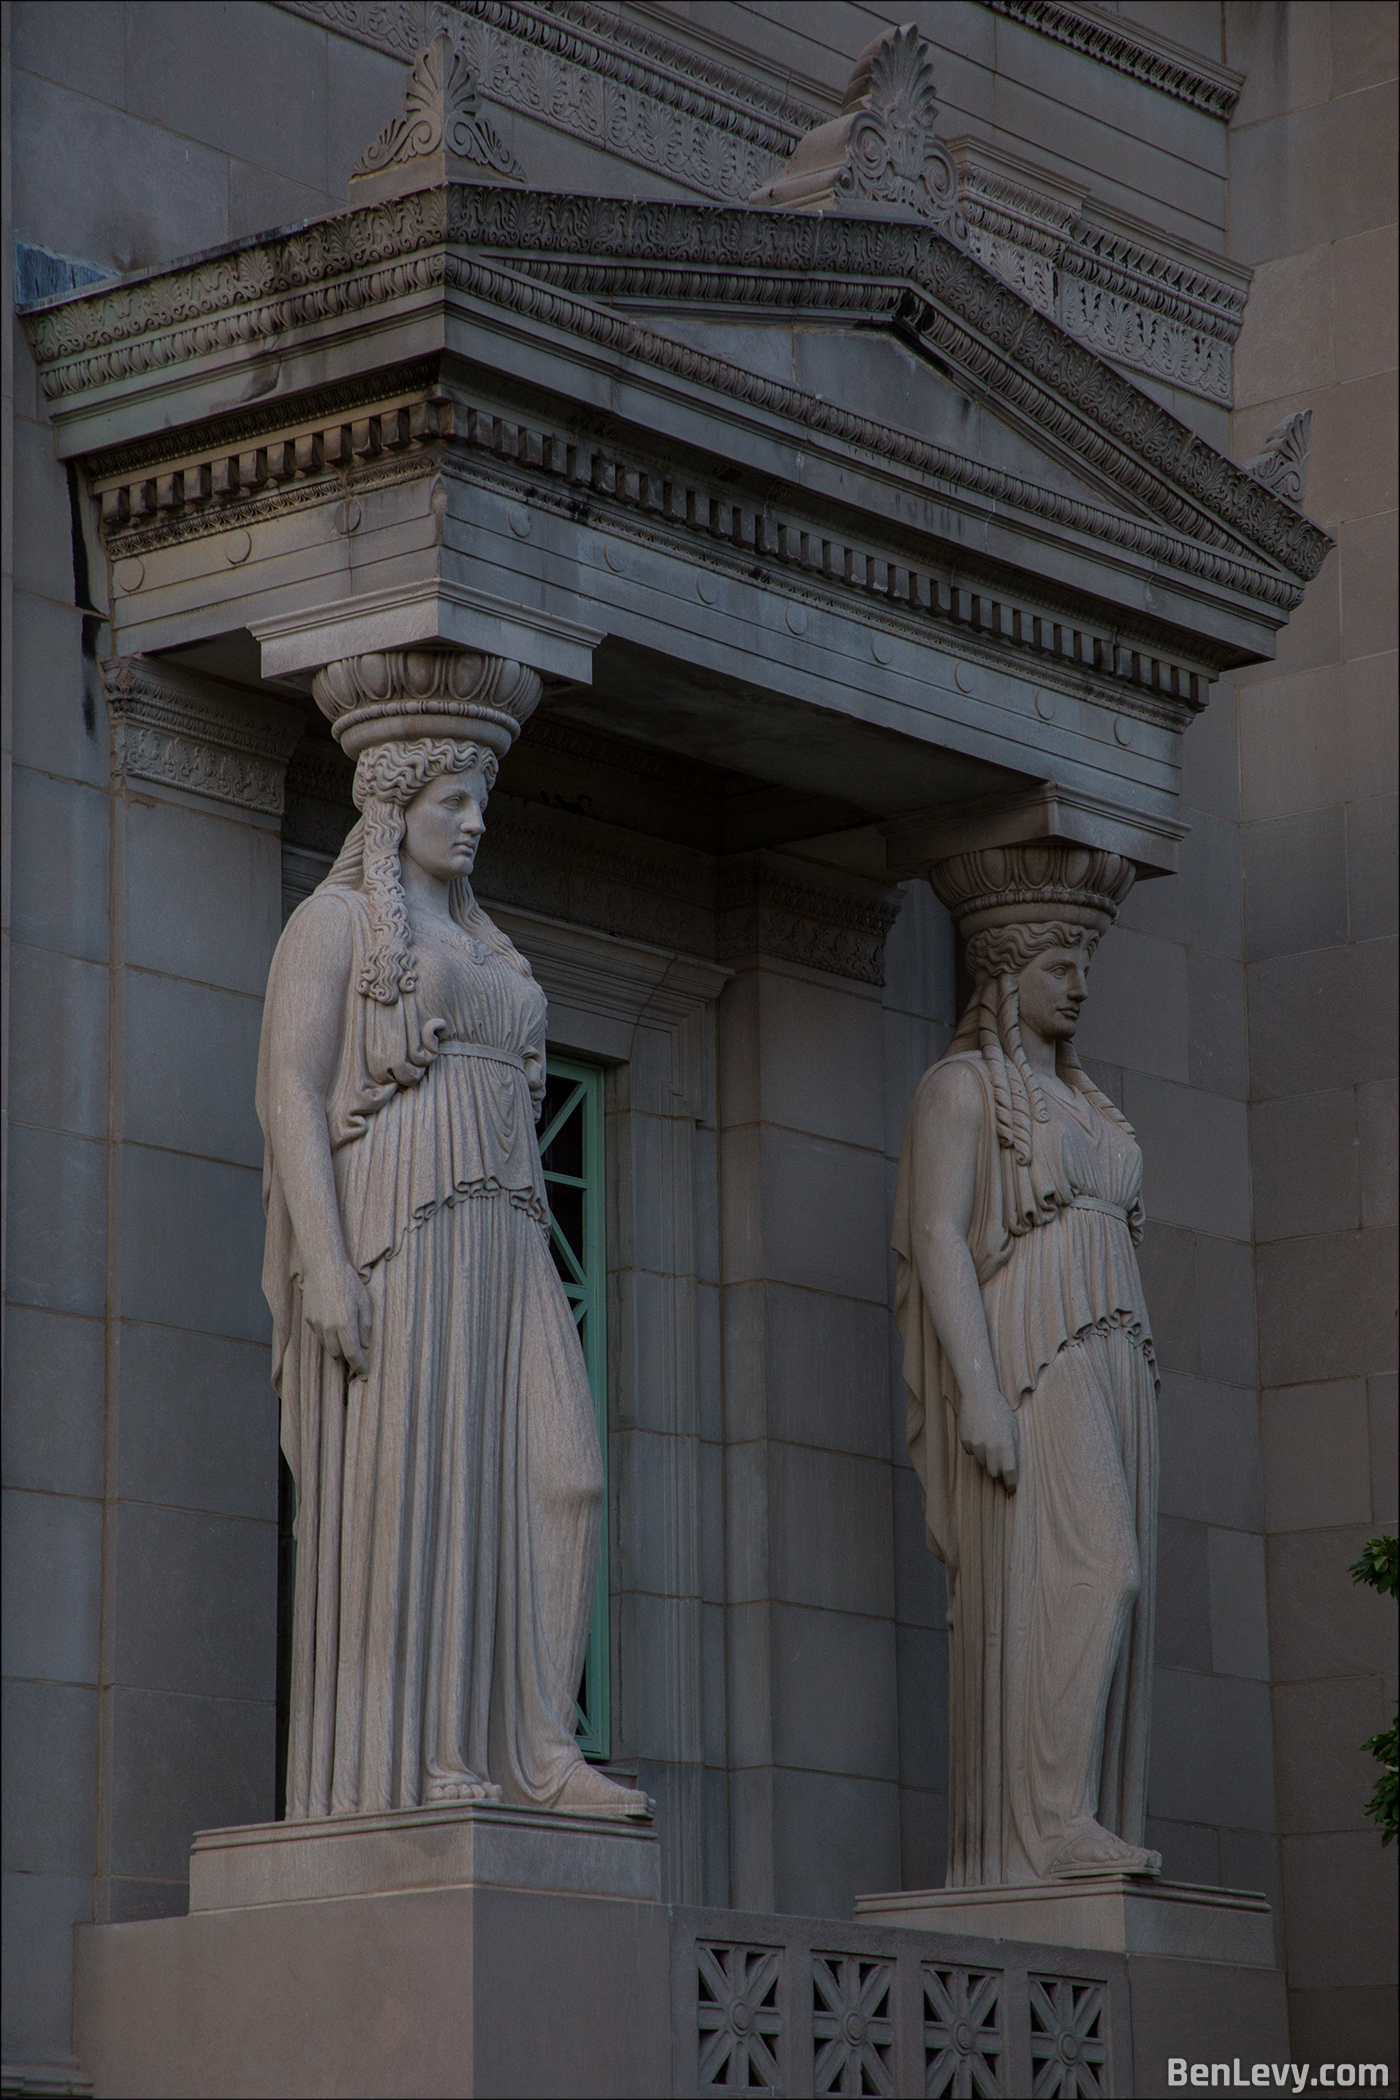 Caryatids, sculpted female figure columns at the Museum of Science and Industry